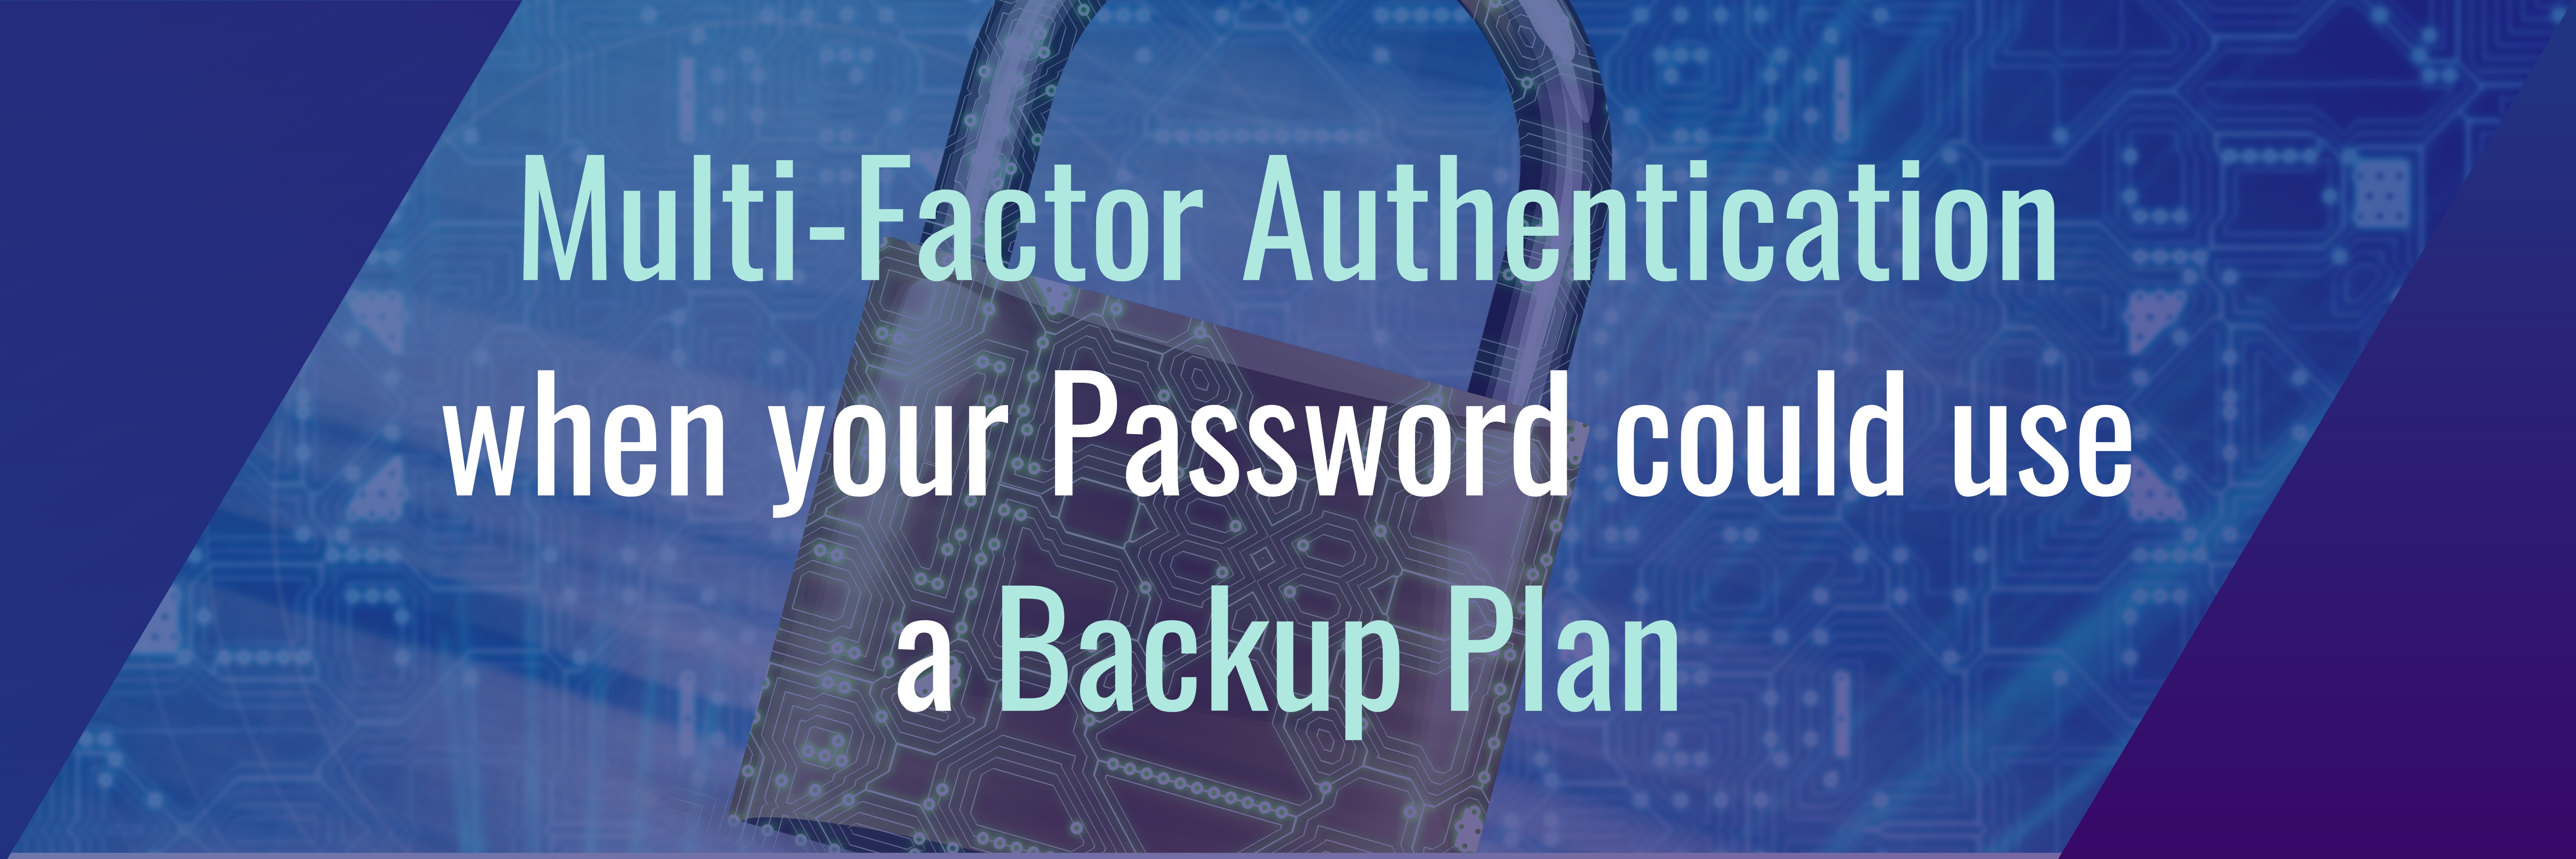 Multi-Factor Authentication when Your Password Could Use a Backup Plan [Infographic]